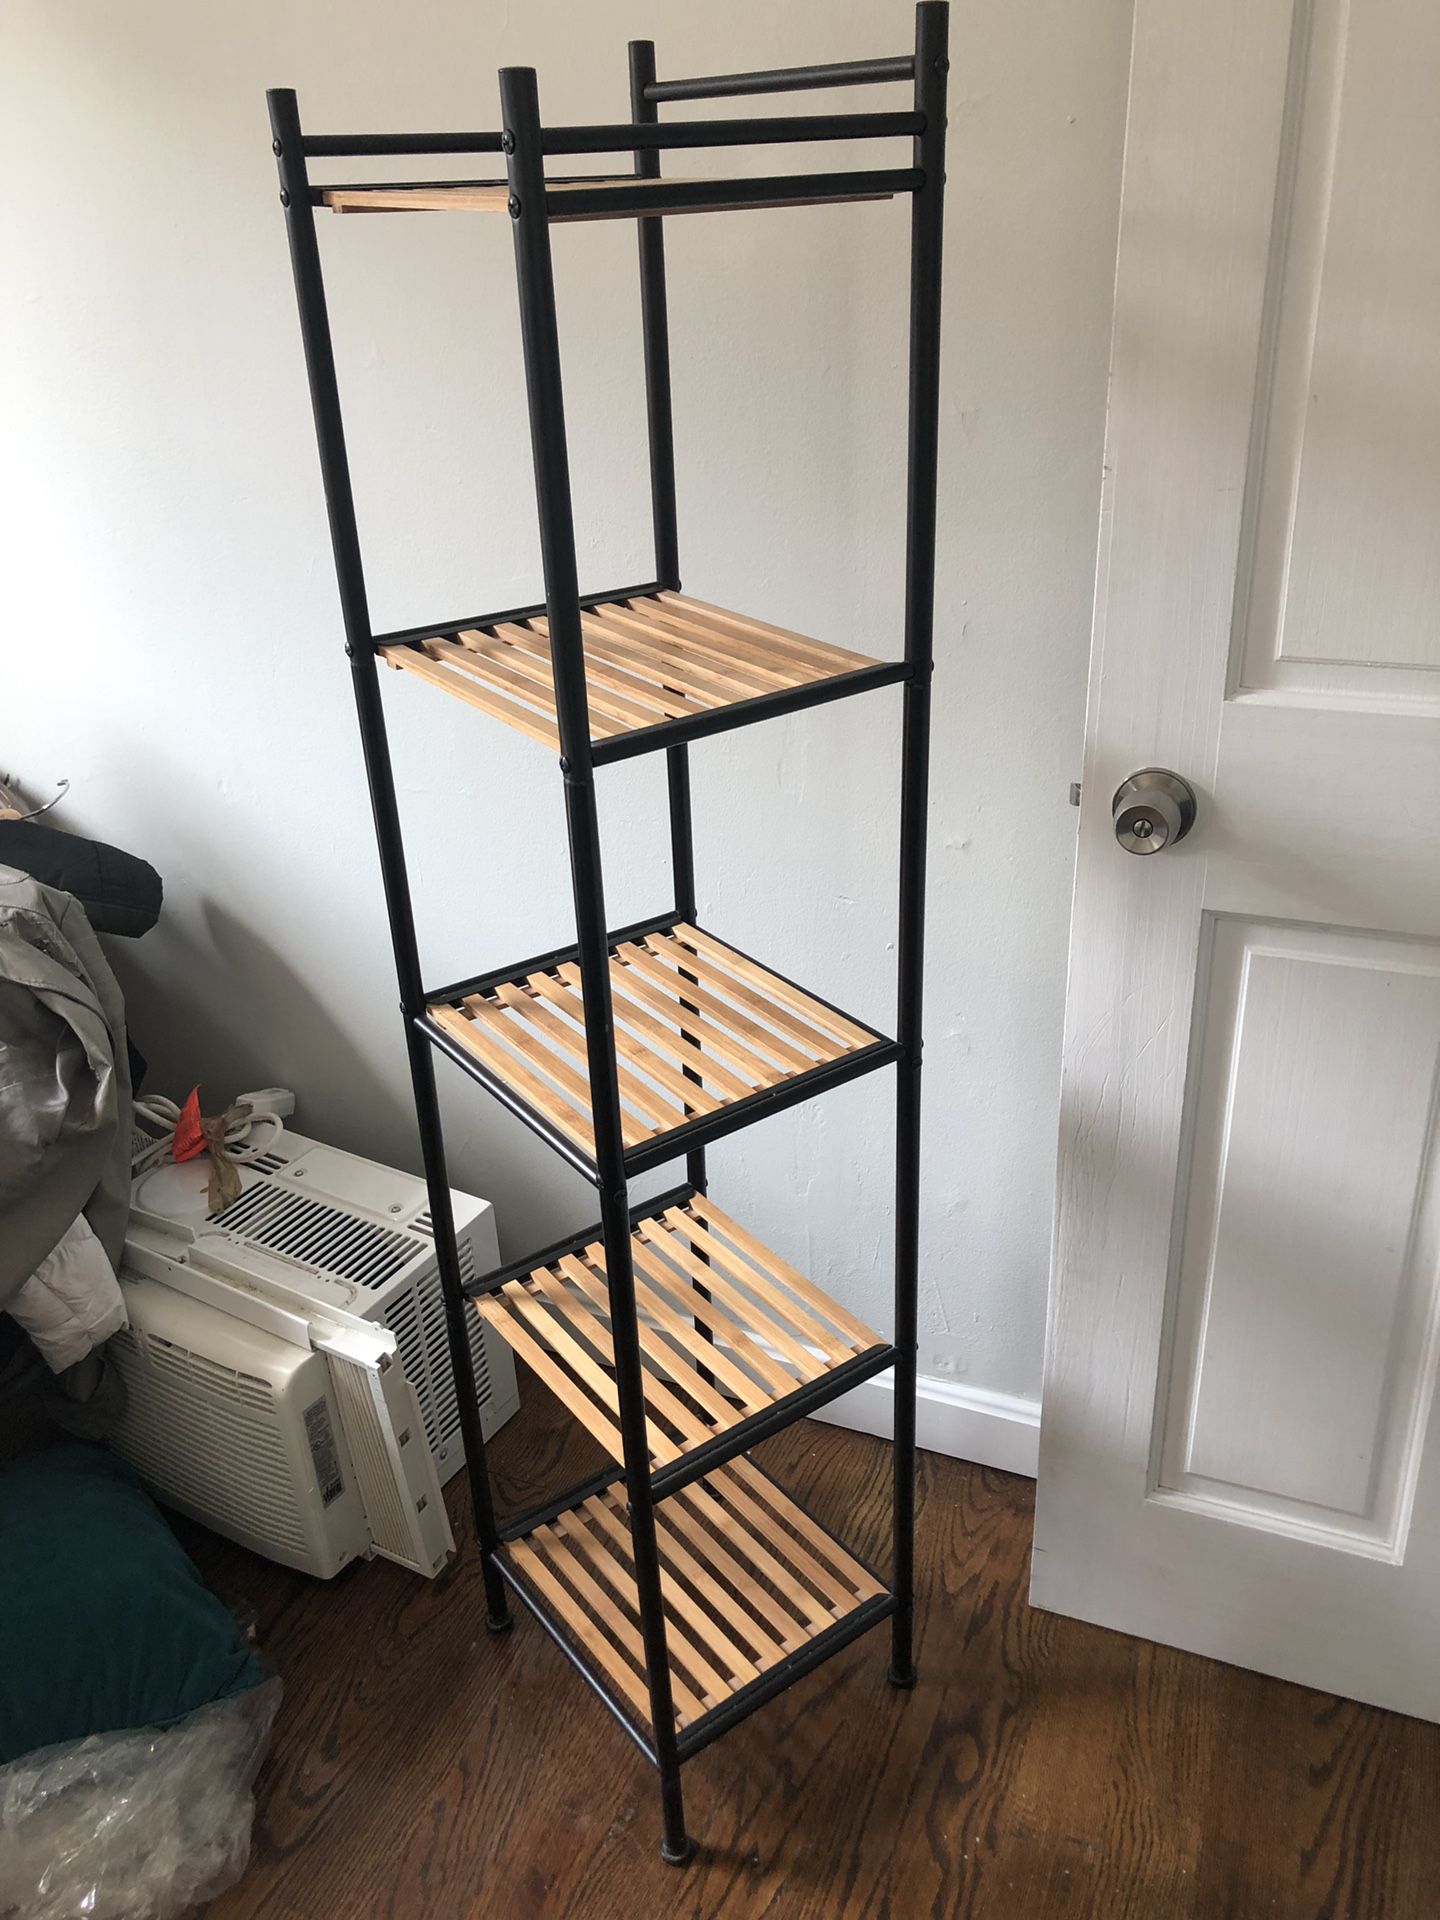 4 Tiered Shelving Unit